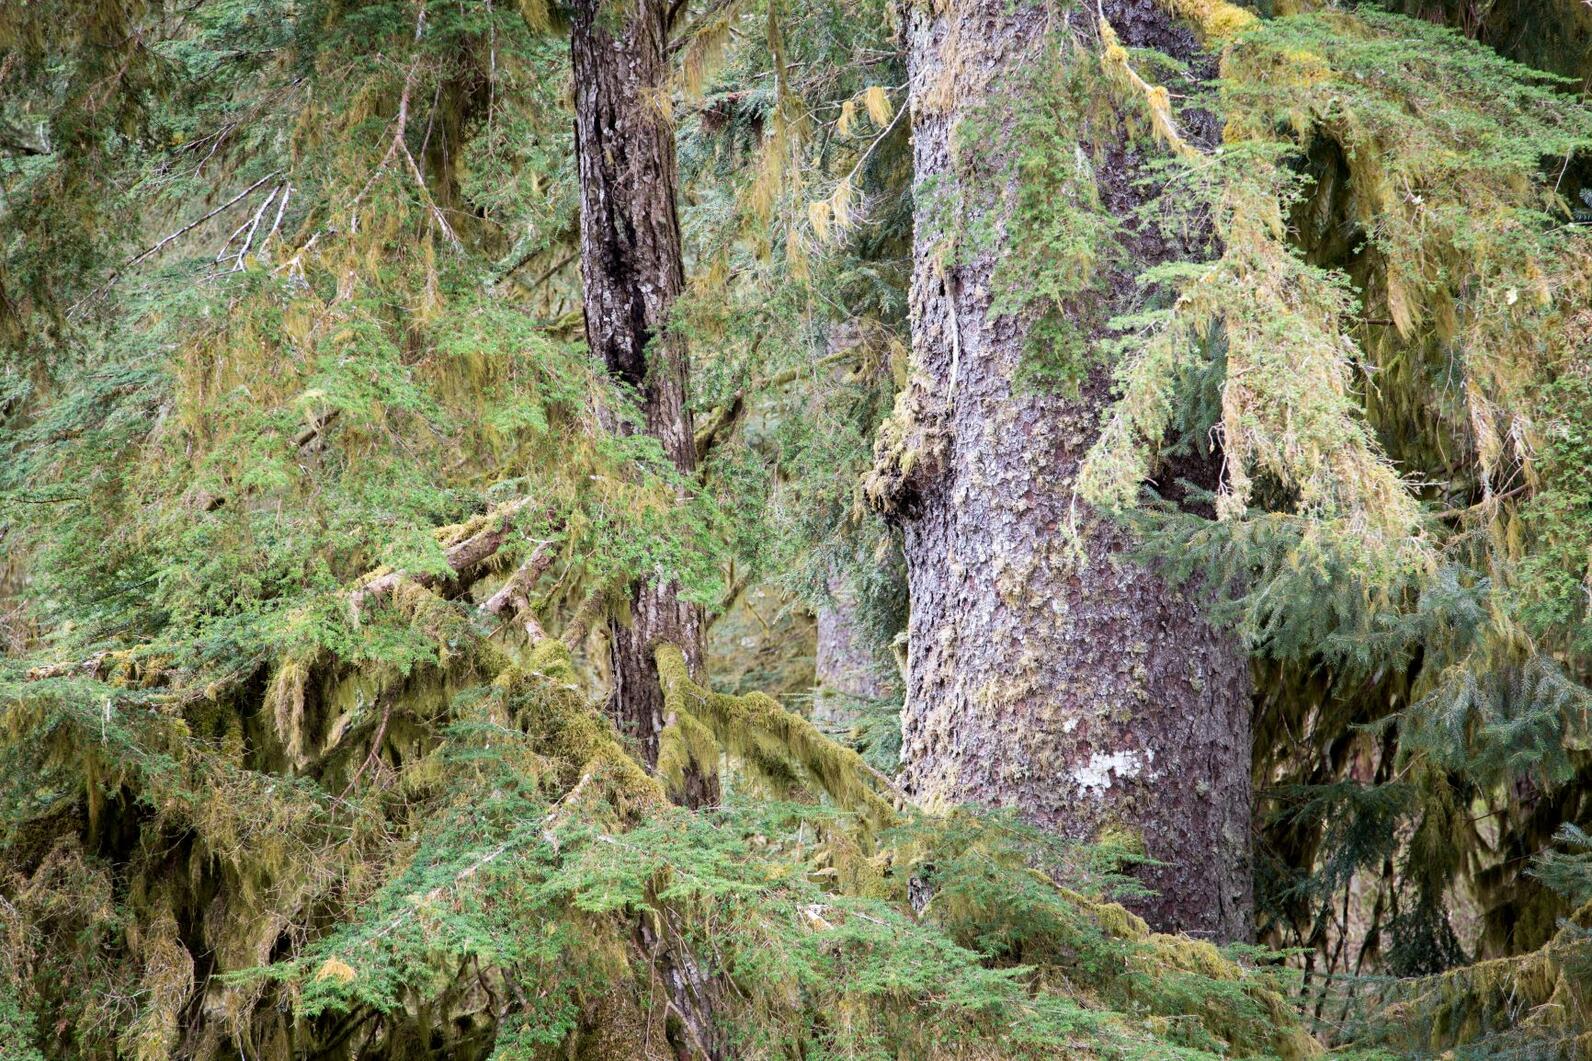 Victory for the Tongass National Forest on Price of Wales.